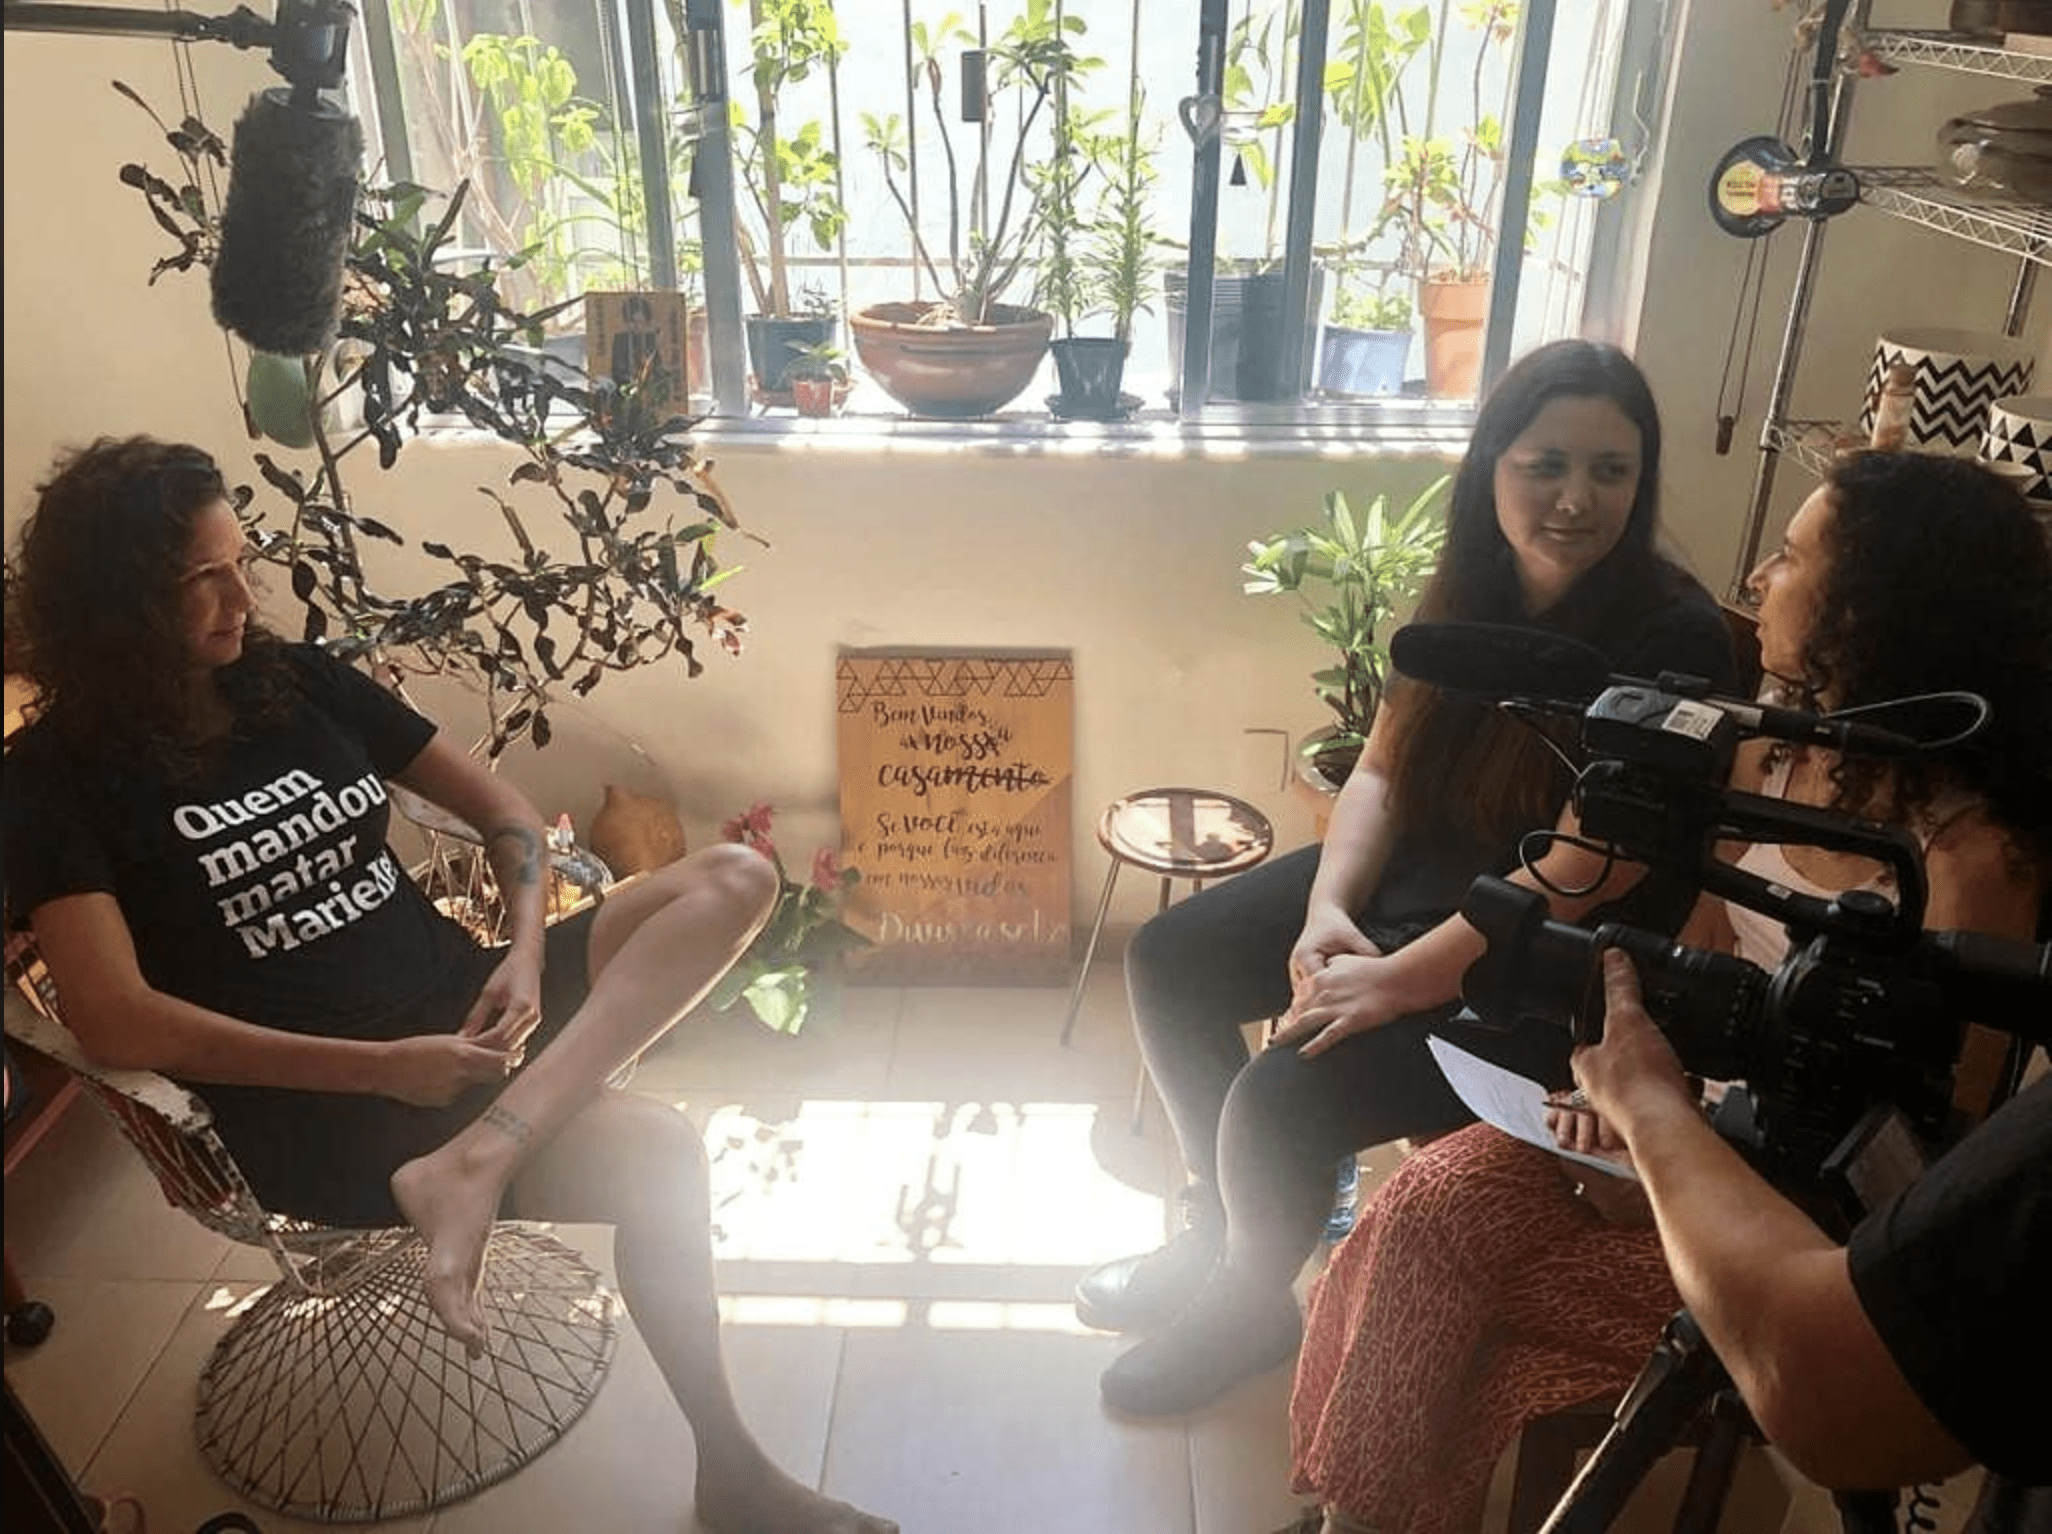 Three people are seated in a bright room with plants and sunlight streaming through a window. One person is holding a microphone, another has a clipboard, and the third is being interviewed, wearing a black shirt with white text. A sign with a quote is visible in the background, reflecting Berkeley Journalism values.